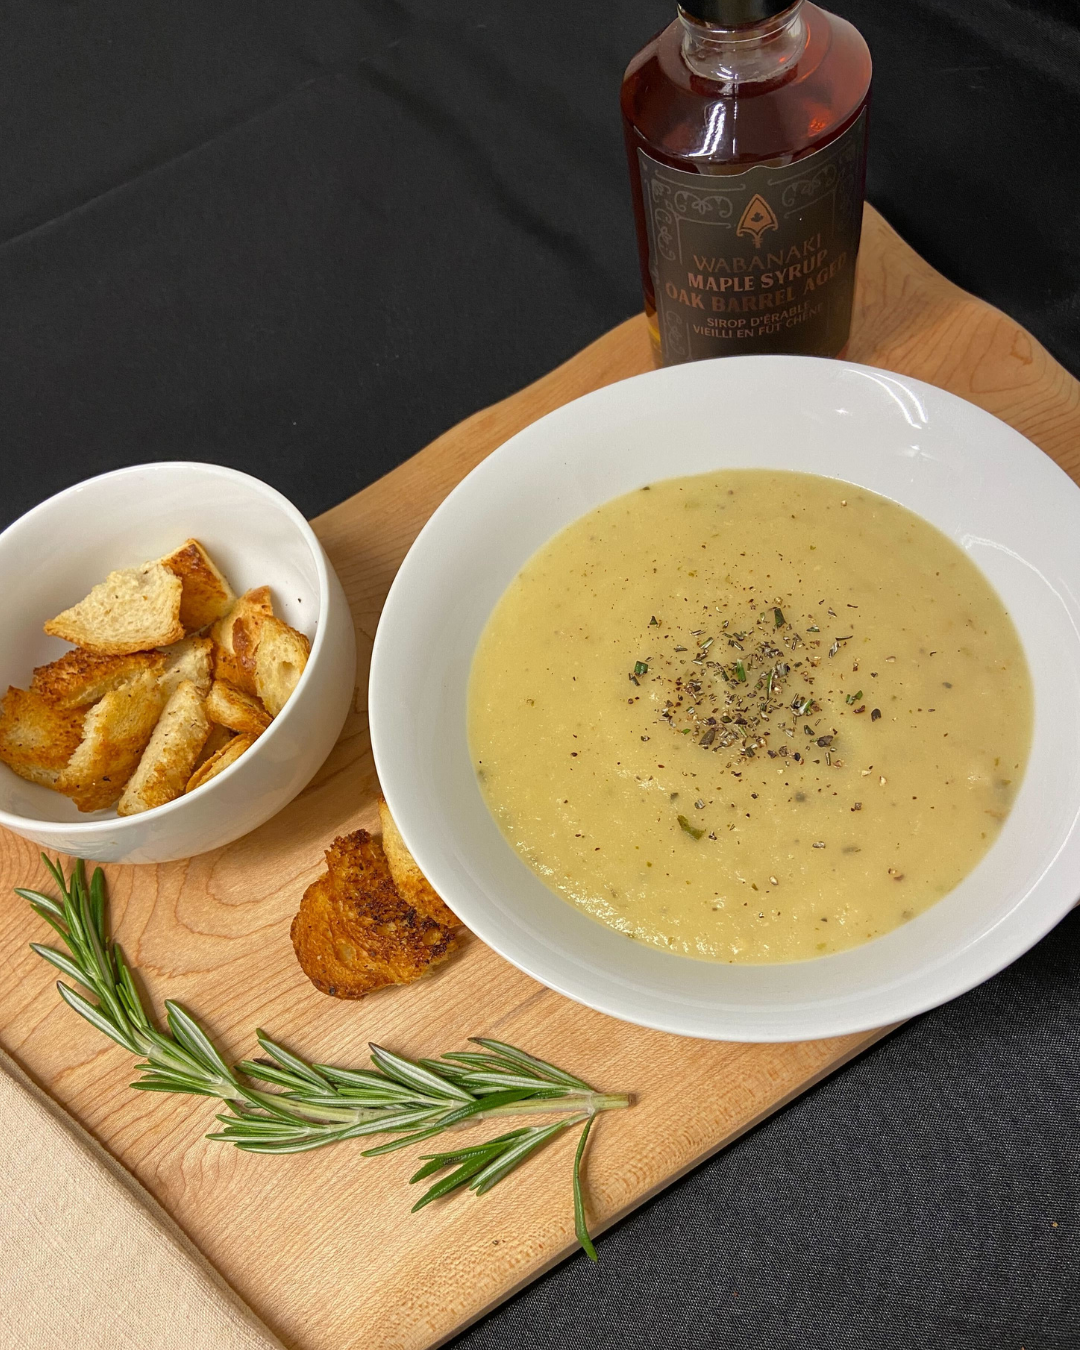 Roasted Parsnip Maple Soup pictured in the bowl along with Wabanaki Maple Syrup and a picture of potato wedges in a white bowl